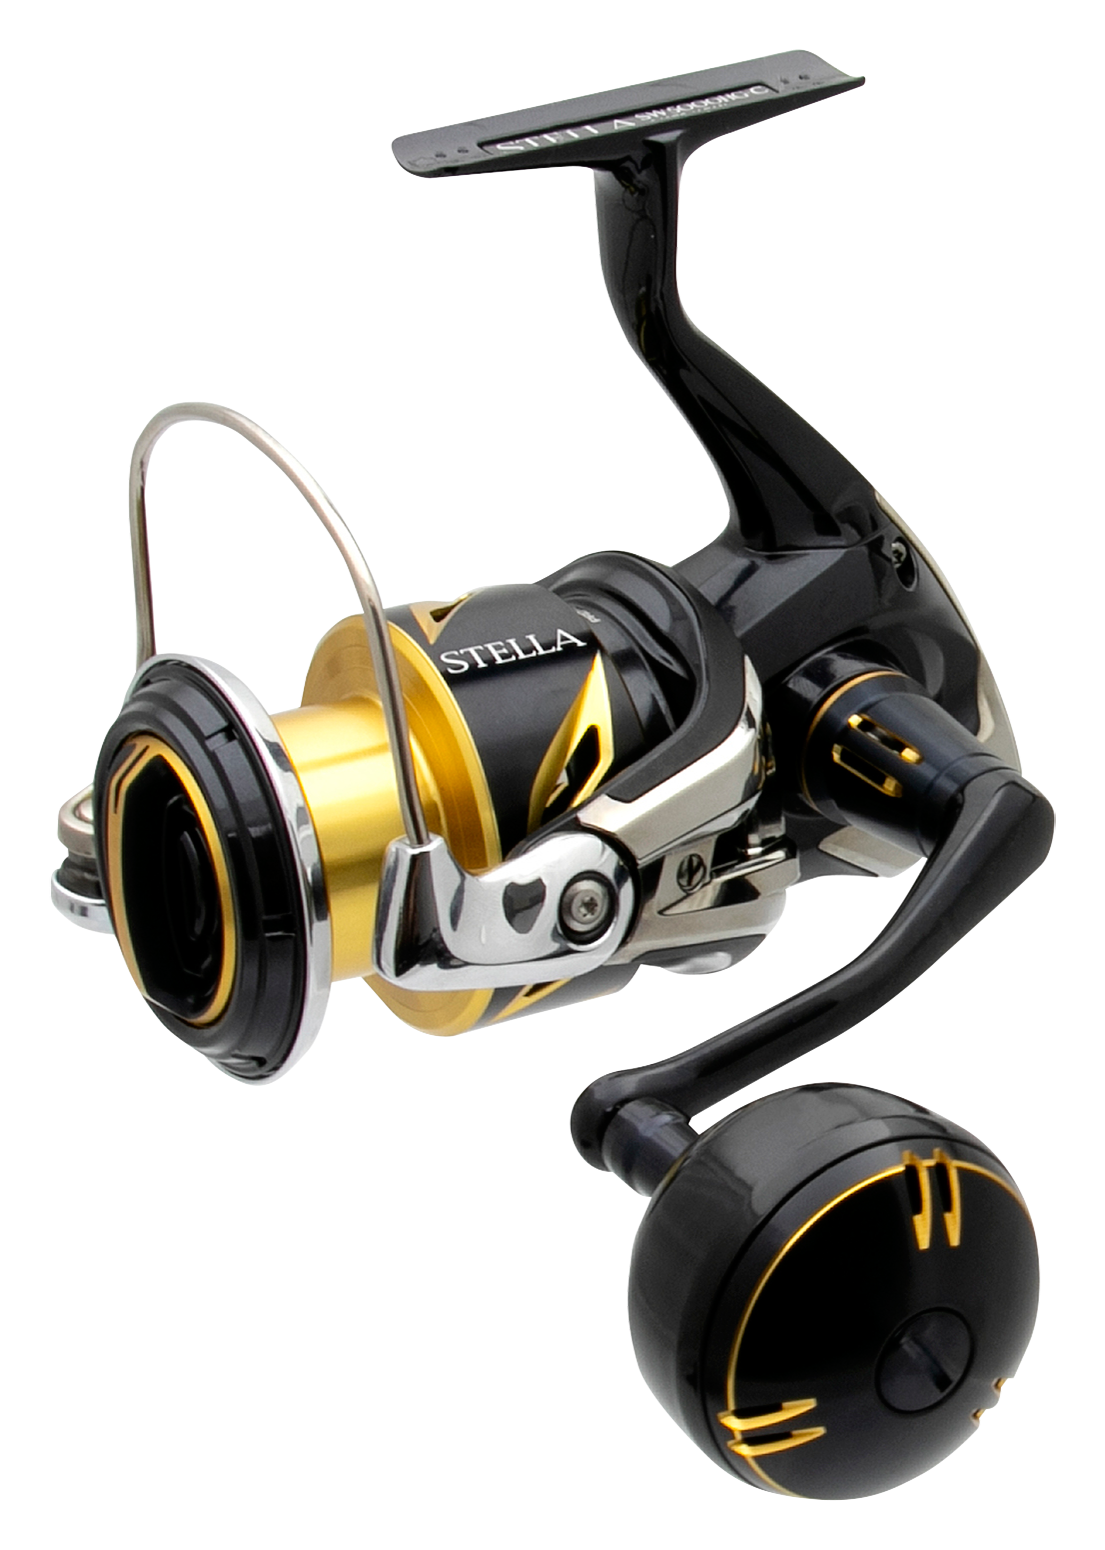 Shimano Stella Sw Spinning Reel png images